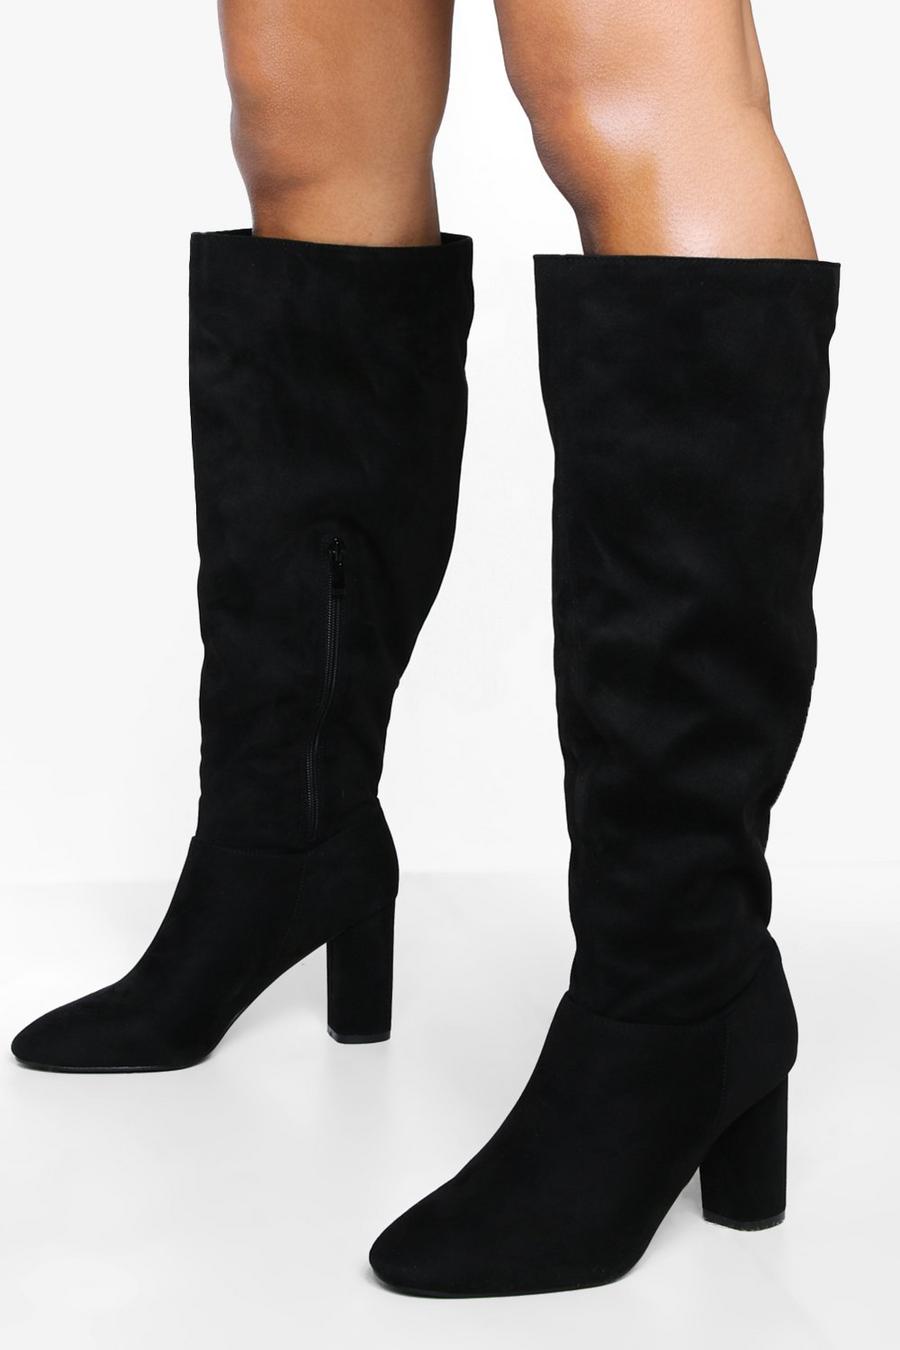 Over The Knee Boots | Thigh High Boots | boohoo UK